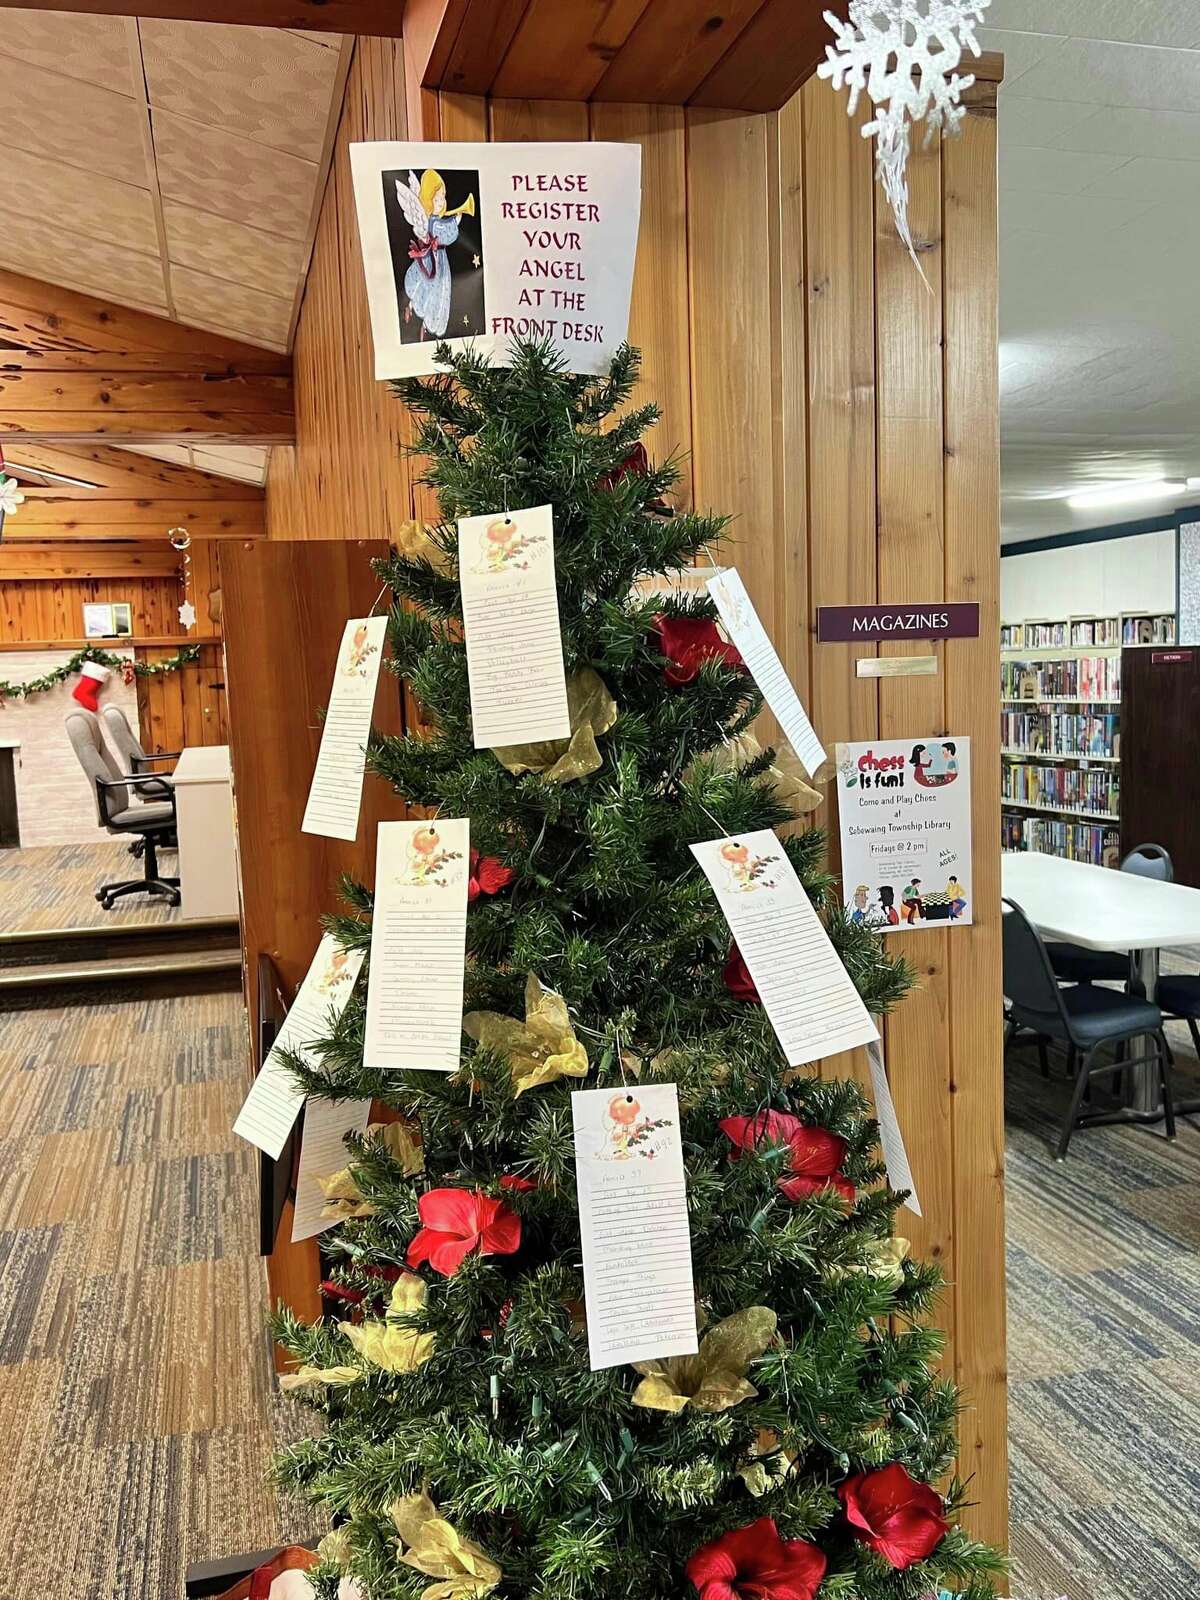 This year's USA Sharing and Caring Angel Tree, with the purpose of providing a good Christmas to children in the area. The USA Sharing and Caring program is making sure that children and others in the community that may be in need can enjoy the holidays just as much as everyone else.